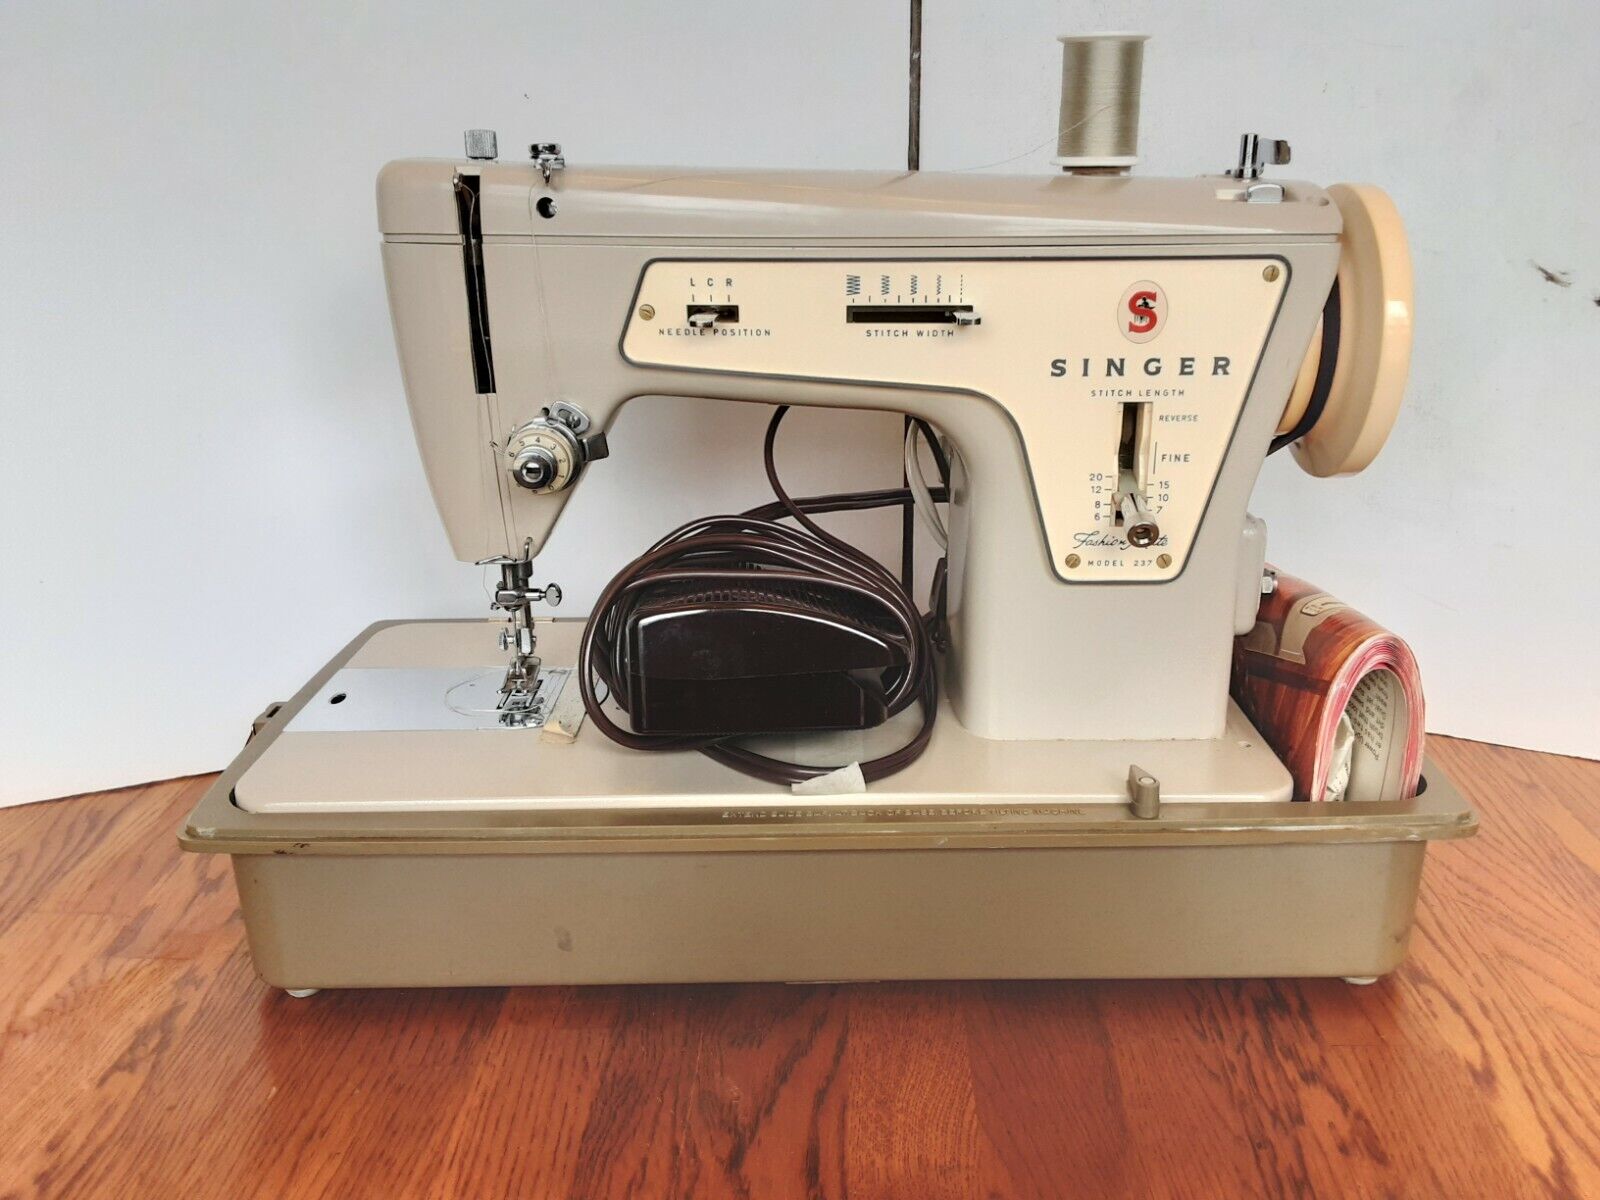 Vintage Singer Sewing Machine Model 237 Fashion Mate in Carrying Case And Manual